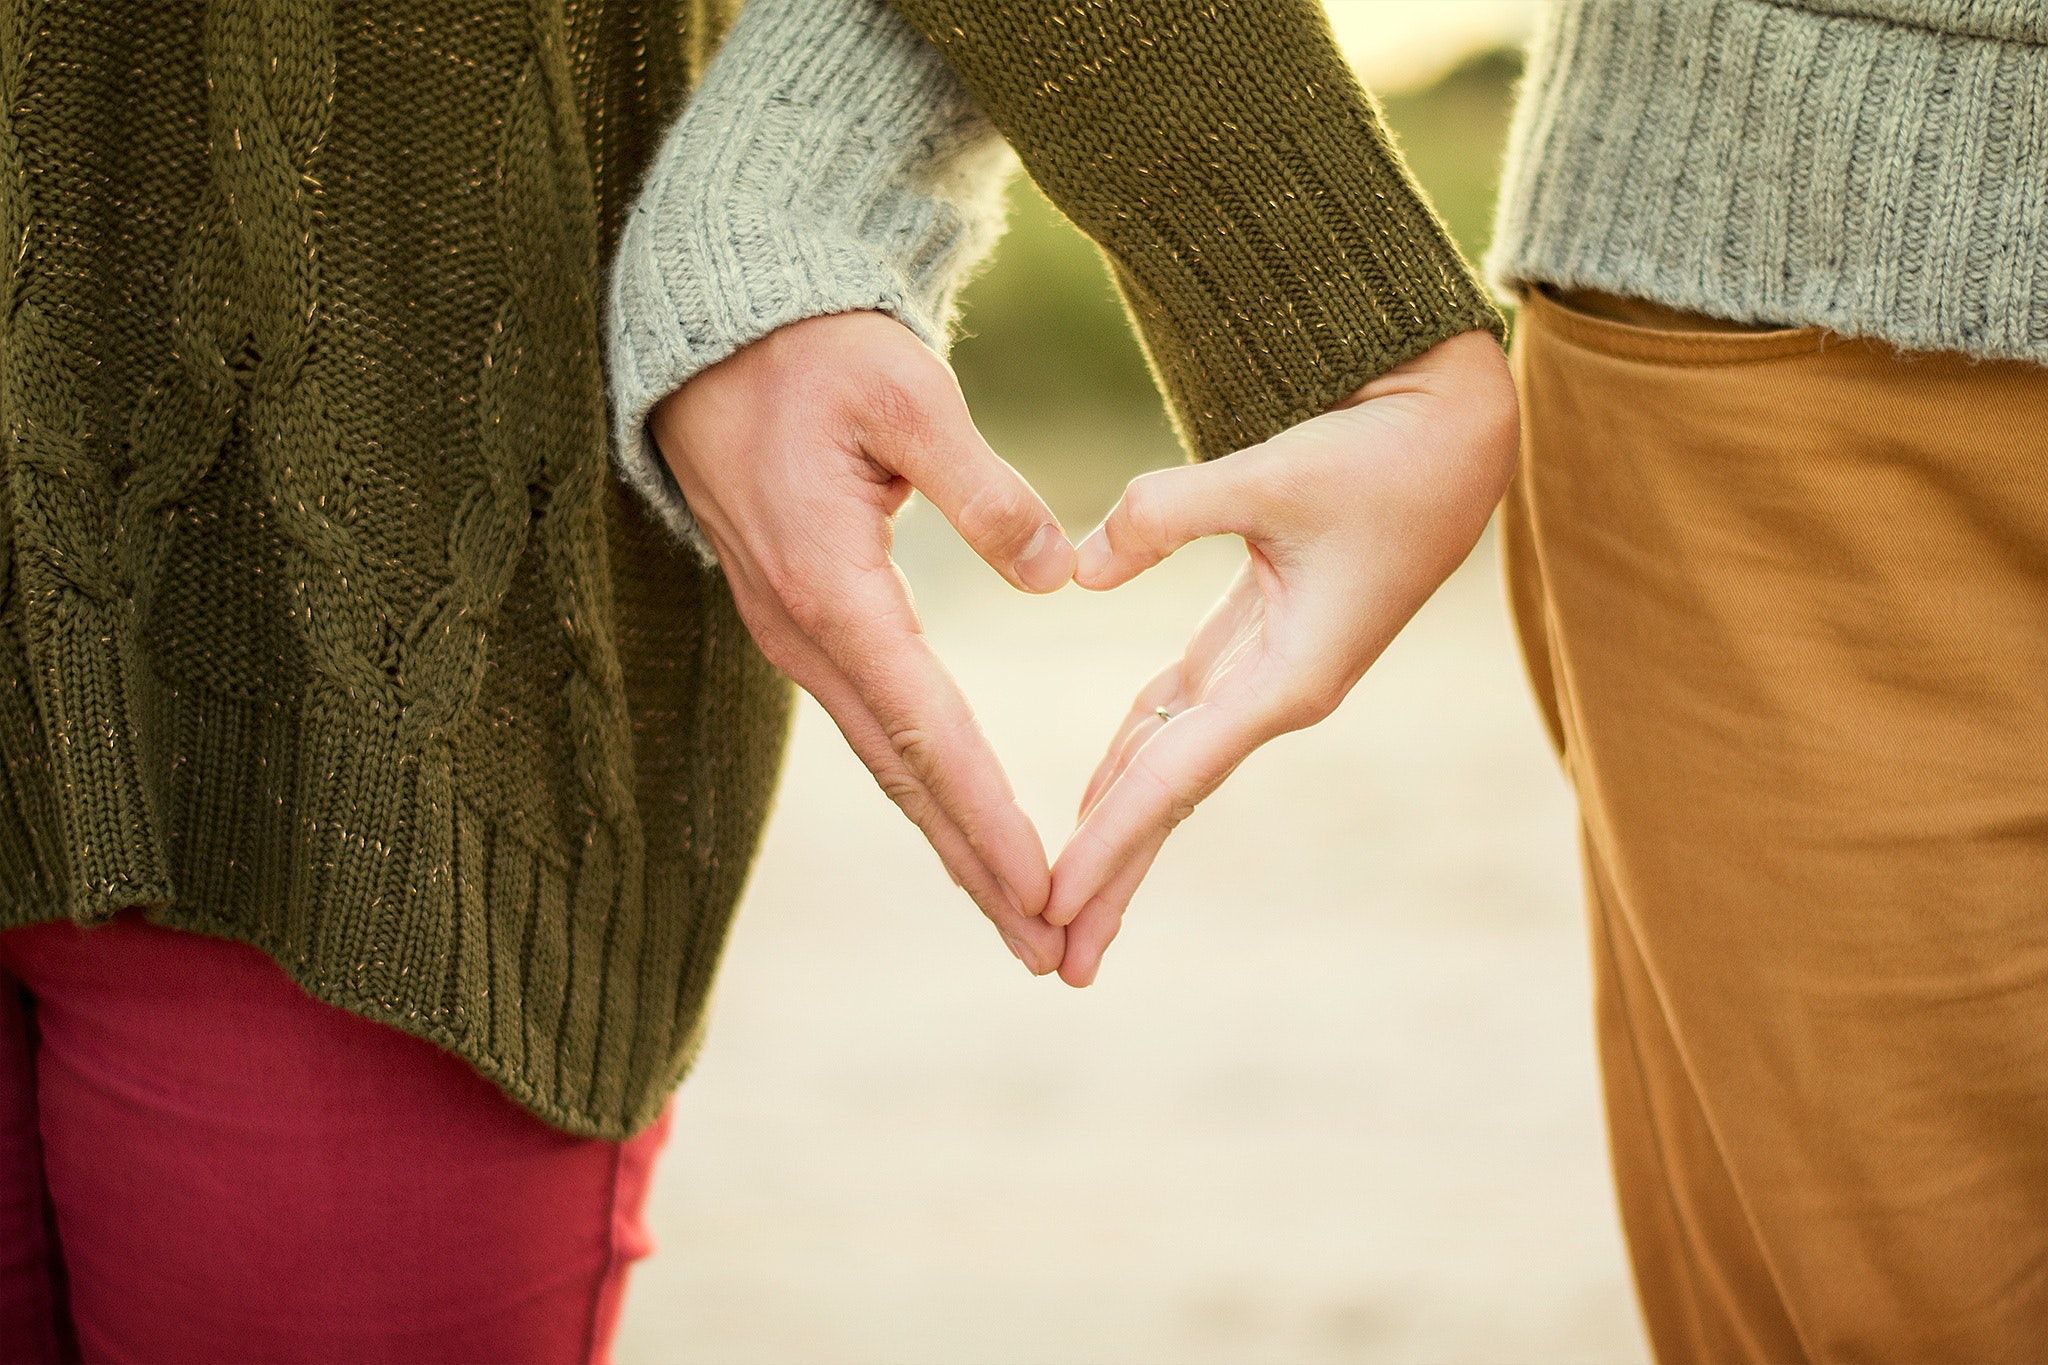 Selective Focus Photography Two Person Making Heart Hand Sign · Free